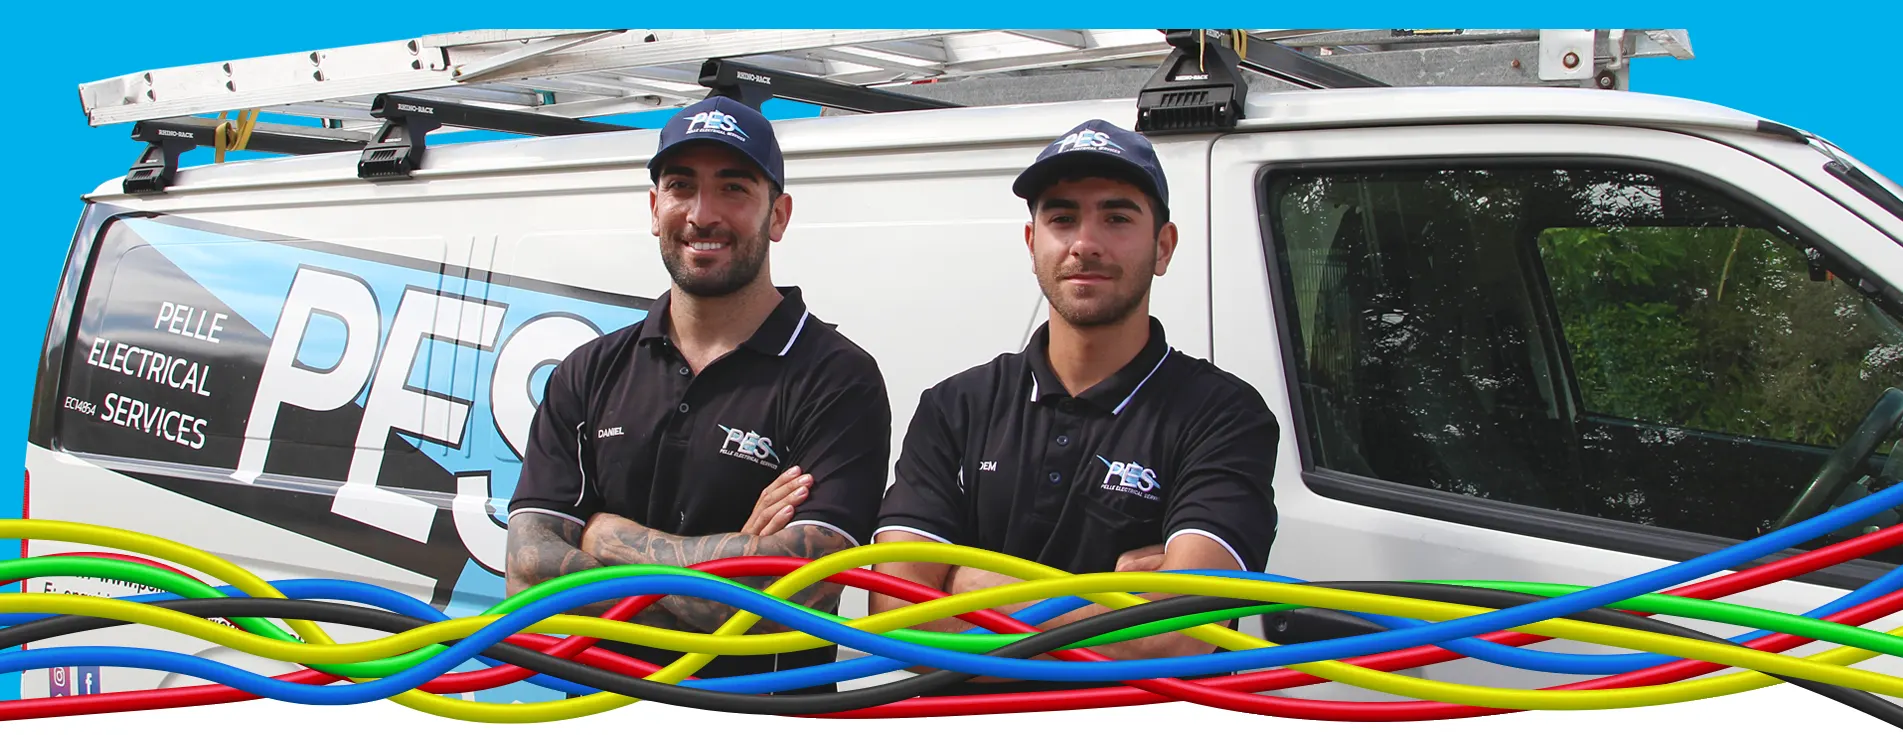 EMERGENCY ELECTRICAN PERTH PELLE ELECTRICAL PES ELECTRICAL SERVICES